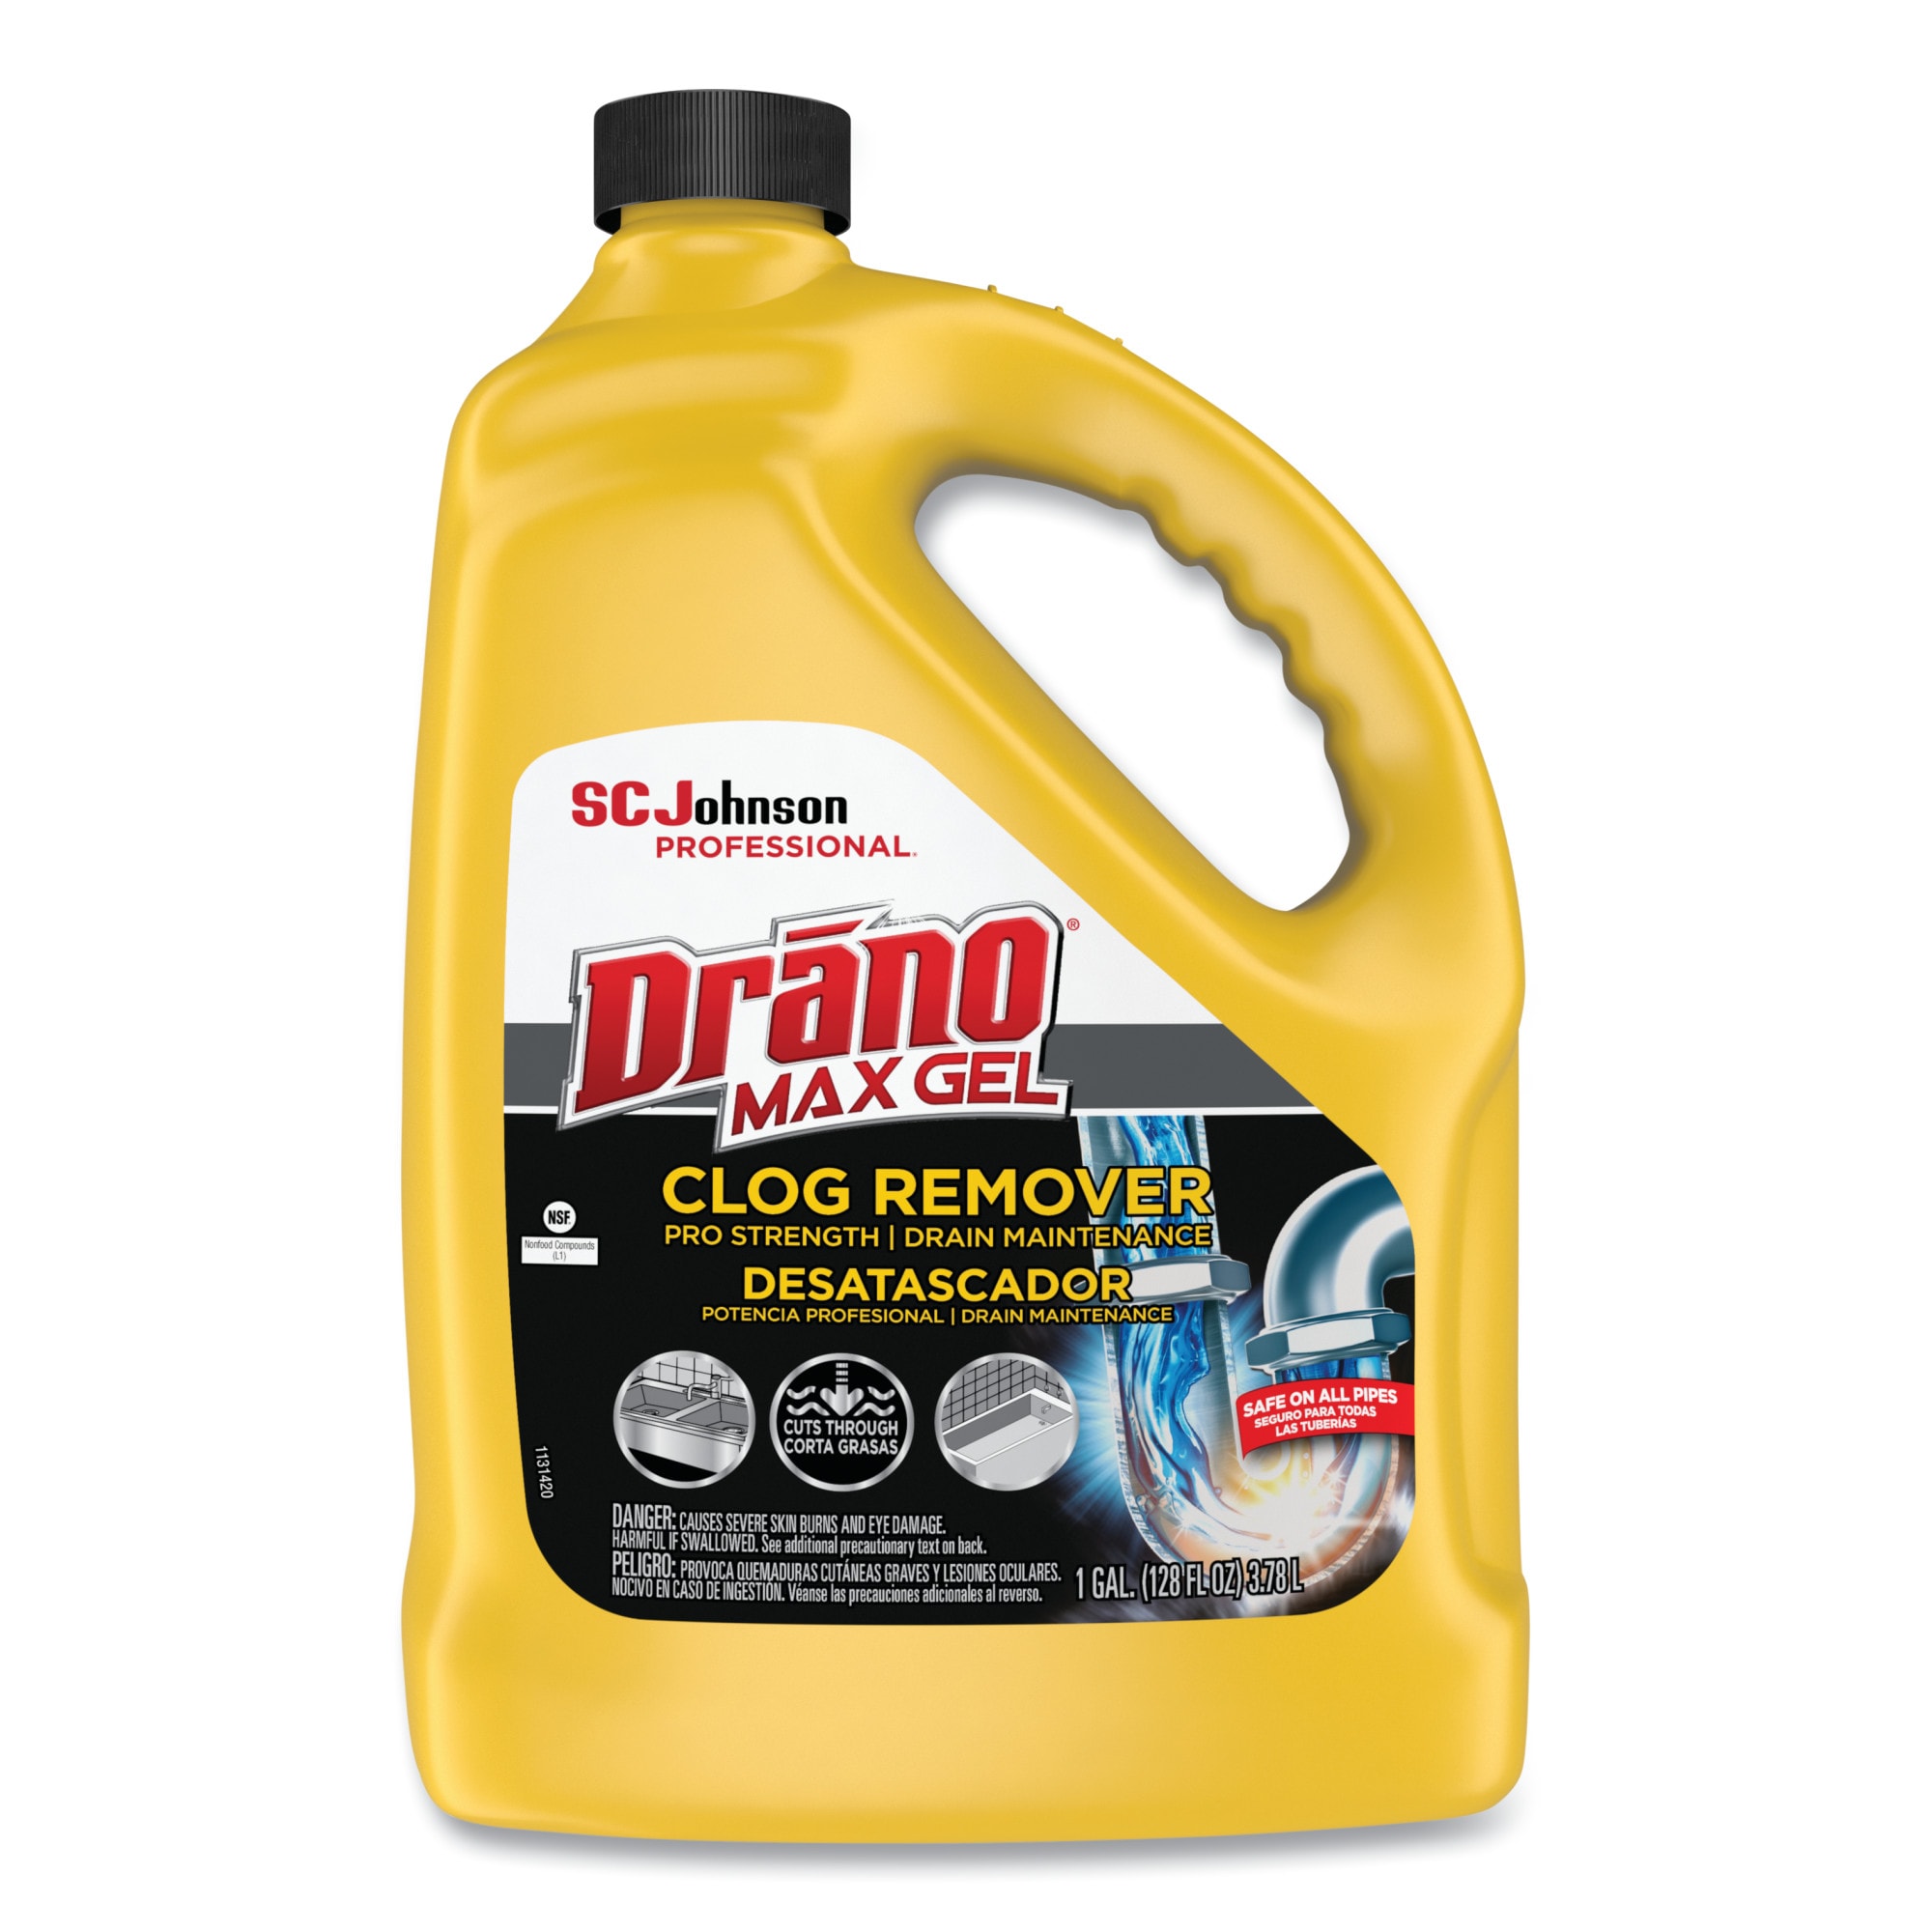 Drano Hair Buster Gel Commercial Line 16-fl oz Drain Cleaner in the Drain  Cleaners department at